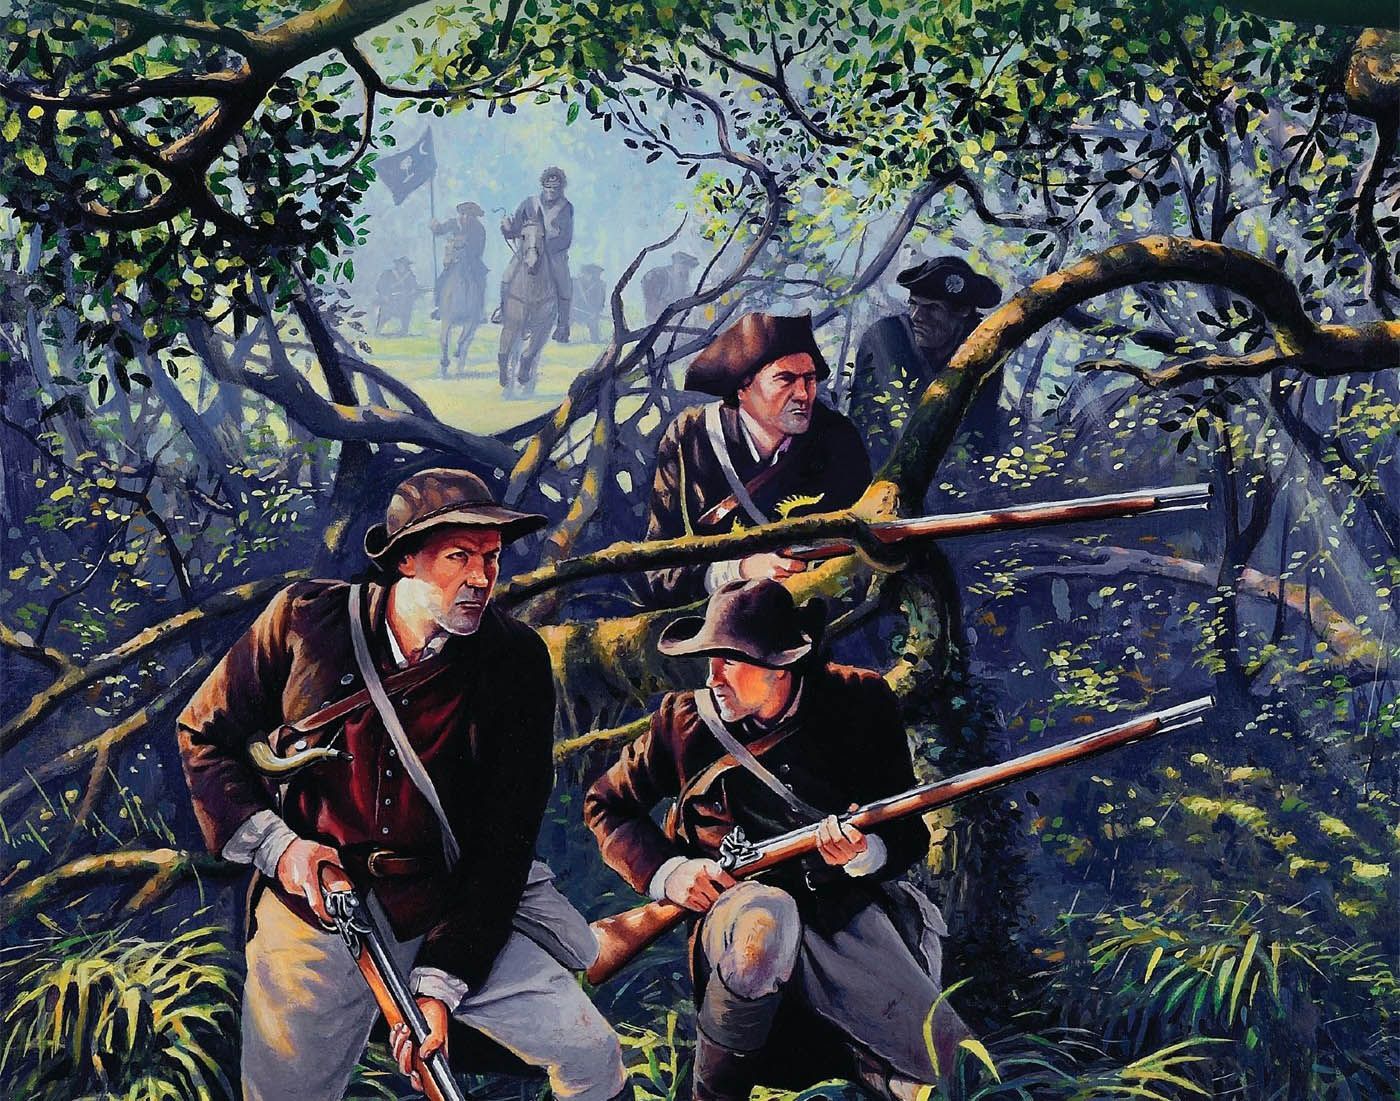 Francis Marion's Guerilla Fighting Style is still studied today